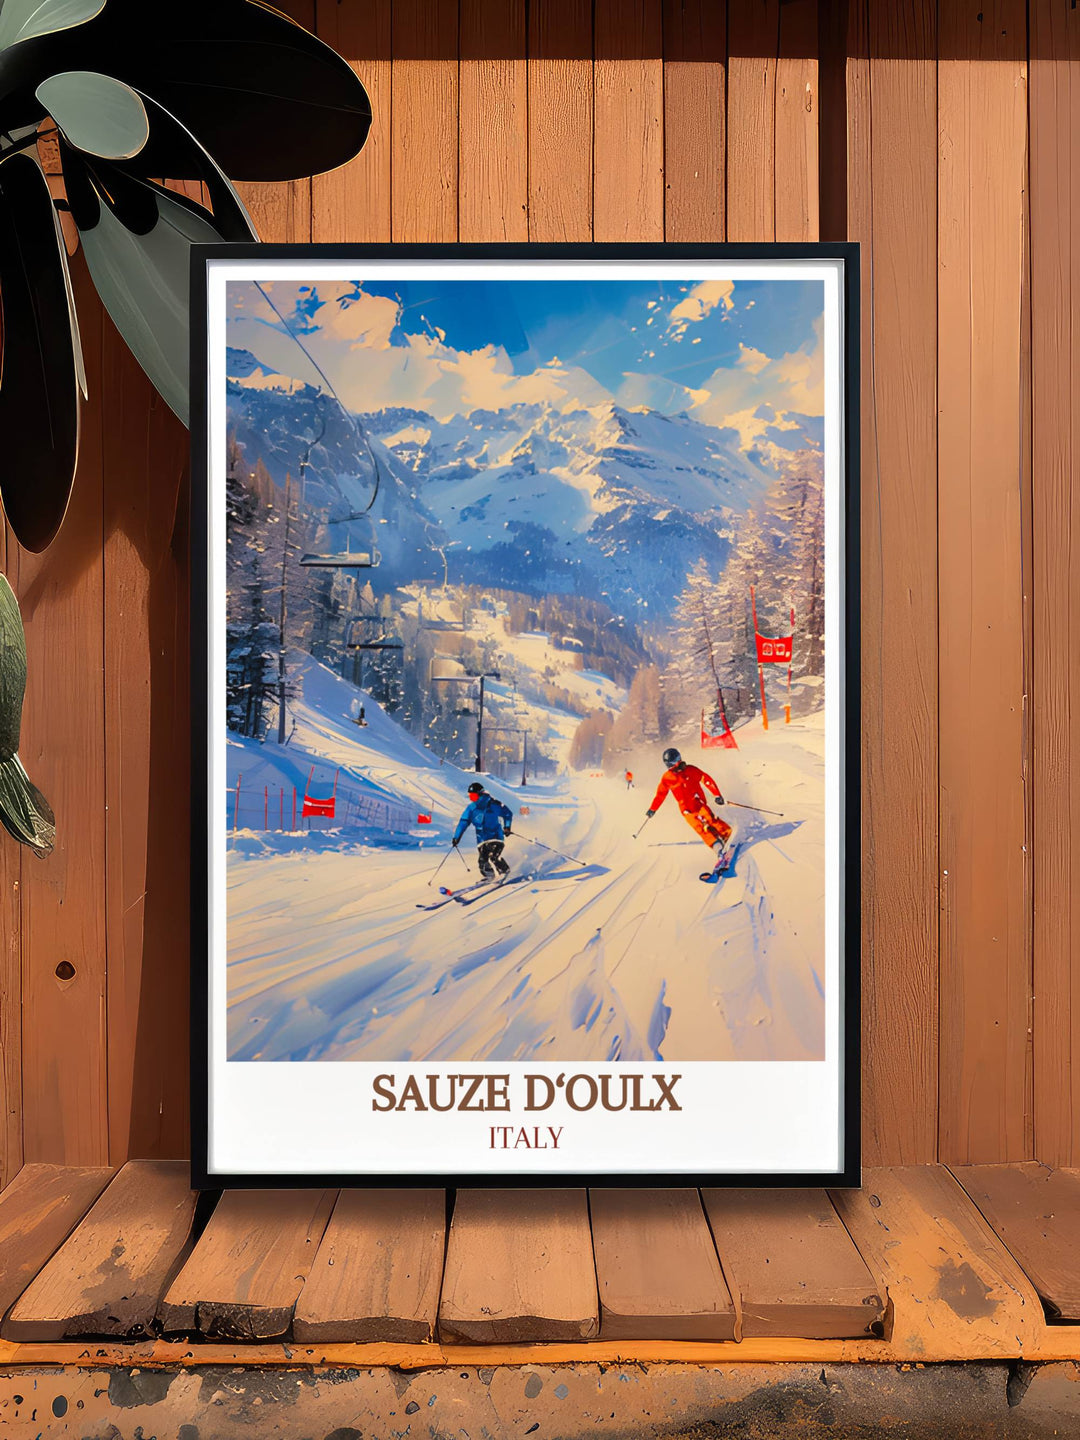 Beautiful Custom Prints of Sauze dOulx highlighting the dynamic ski slopes and picturesque scenery of this renowned ski resort.